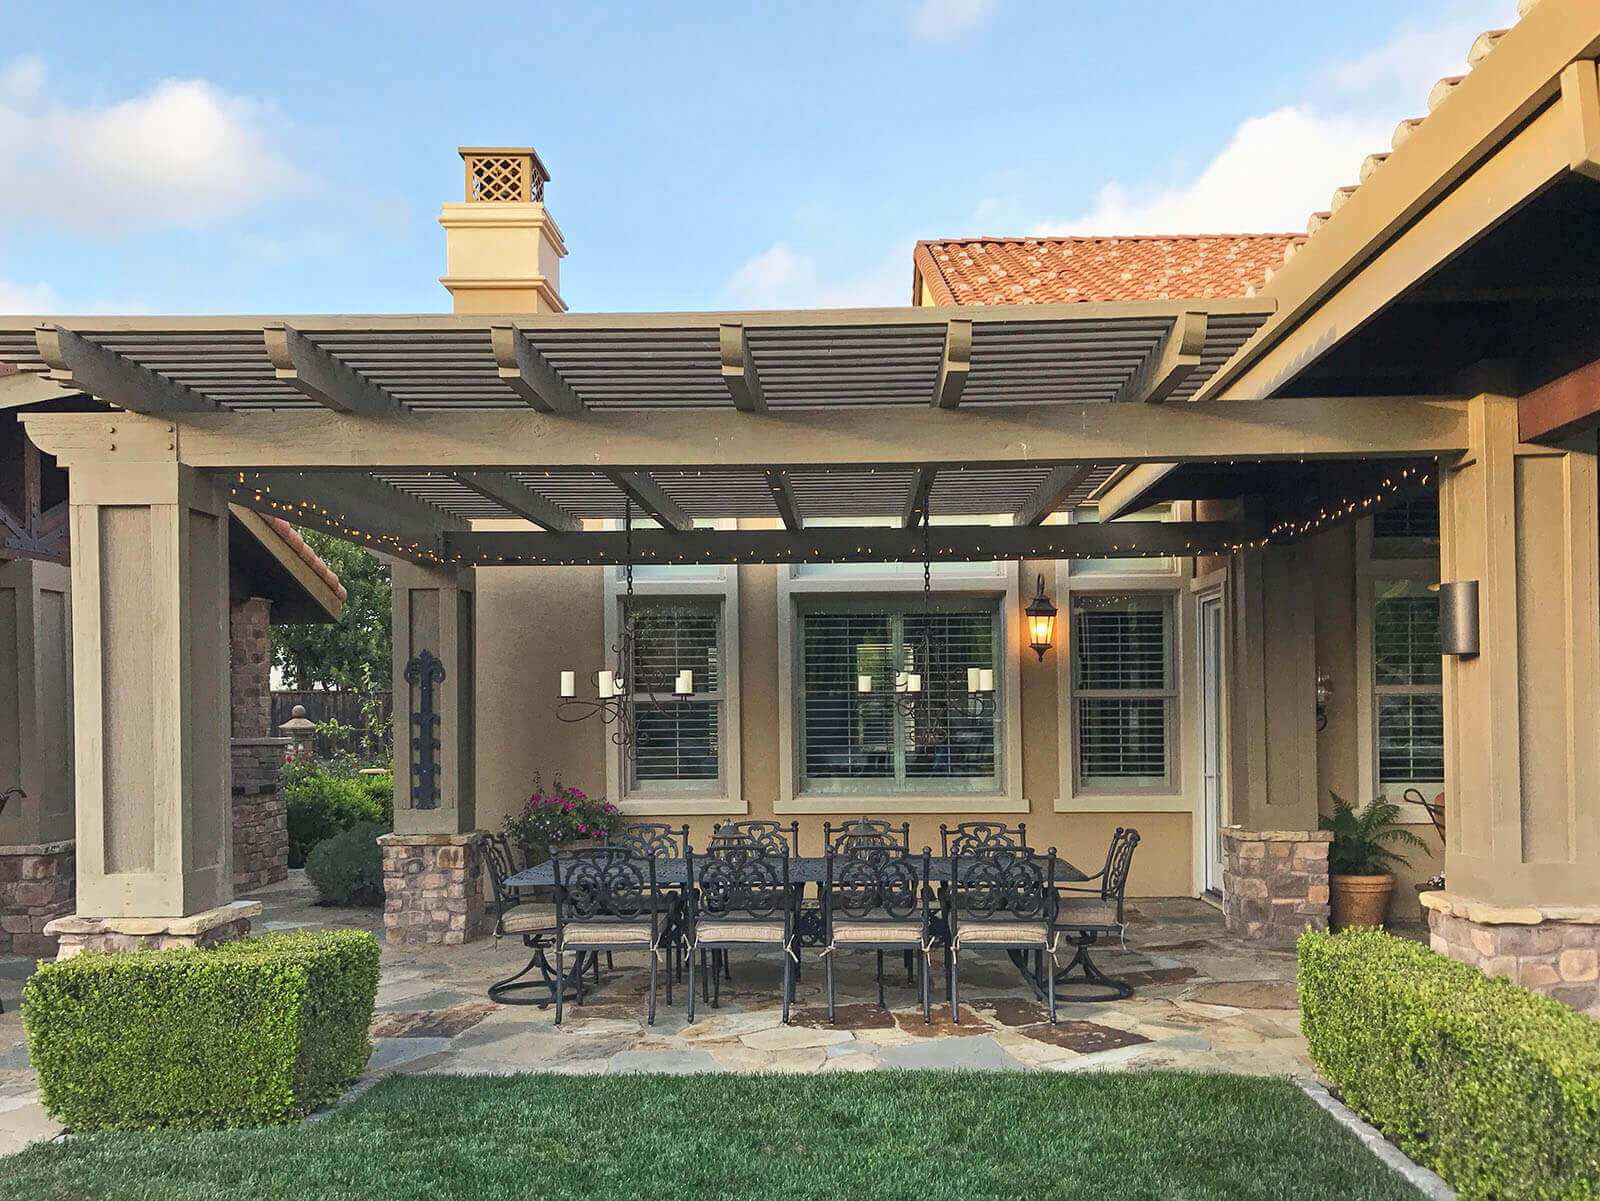 Wood slat-roofed pergola with stone detailing on a stone patio with wrought iron dining furniture and chandeliers